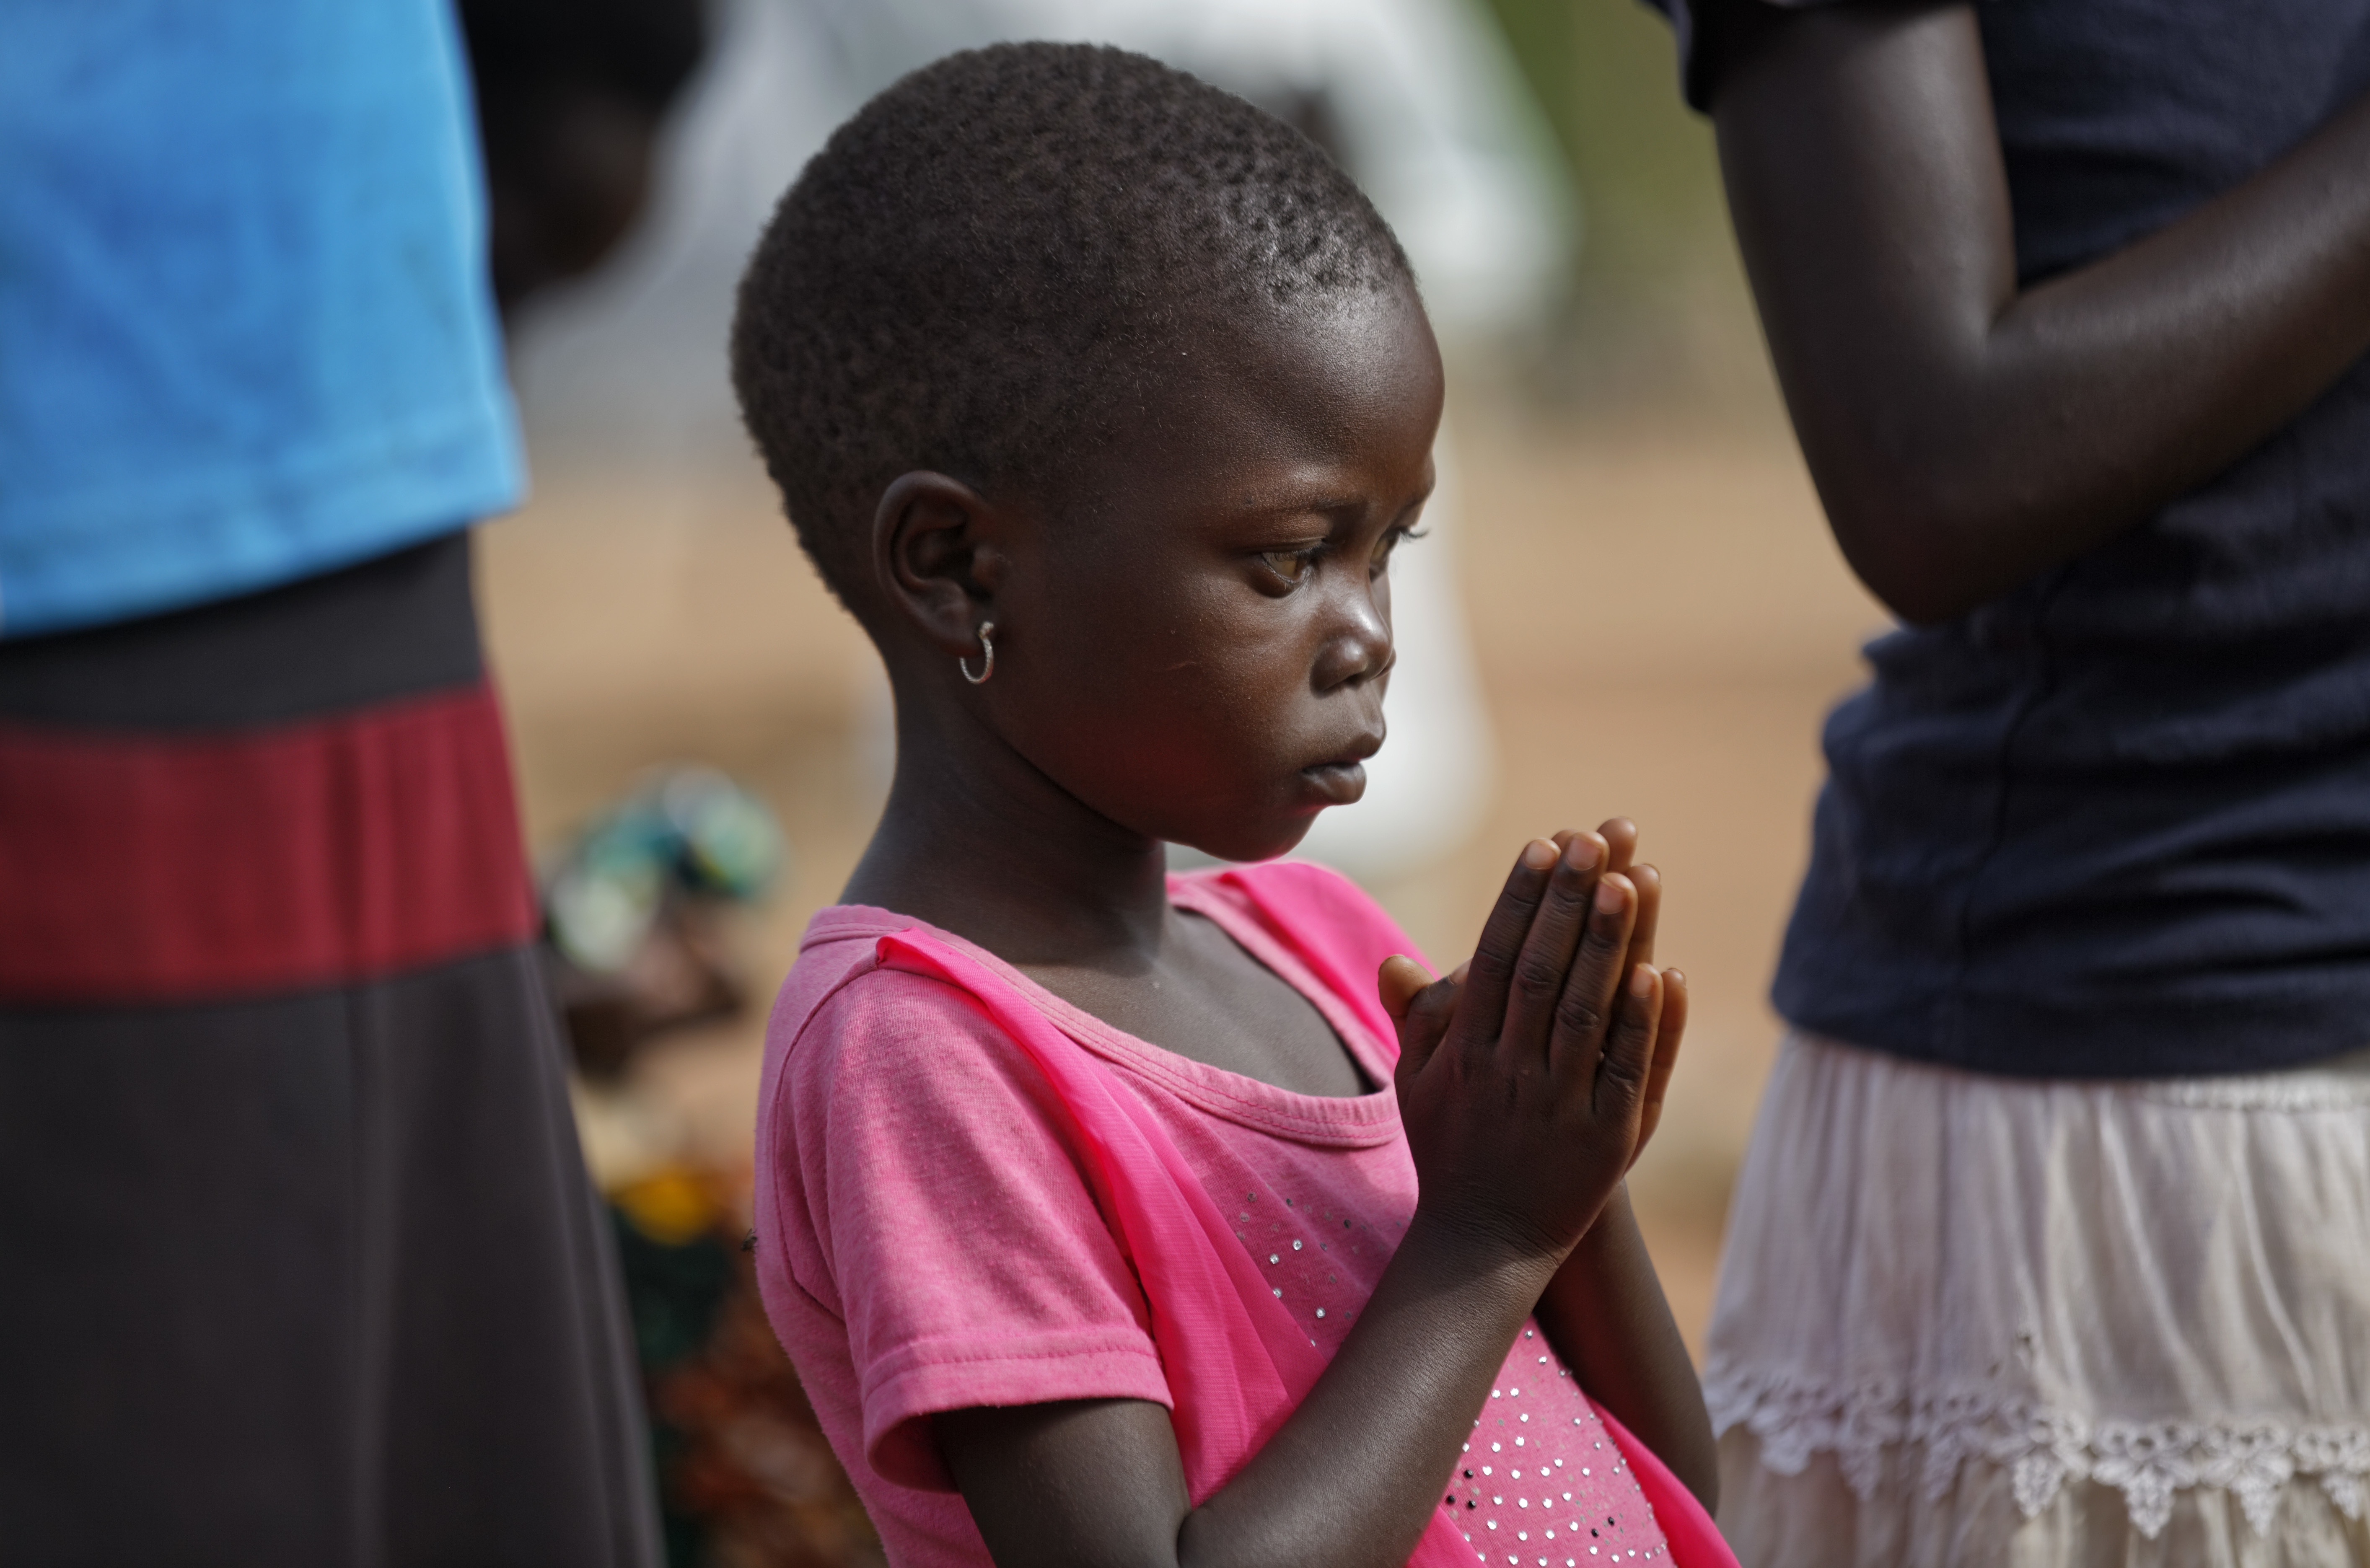 In this photo taken Sunday, June 4, 2017, a young member of the congregation prays at a pentecostal born-again church in Bidi Bidi refugee settlement in northern Uganda. The South Sudanese refugees meet in open-air churches rigged from timber with seats made only from planks of wood or logs drilled into the ground, yet these churches for the born-again Christians are oases of joy among the daily humiliations that come with rebuilding their lives. (AP Photo/Ben Curtis)